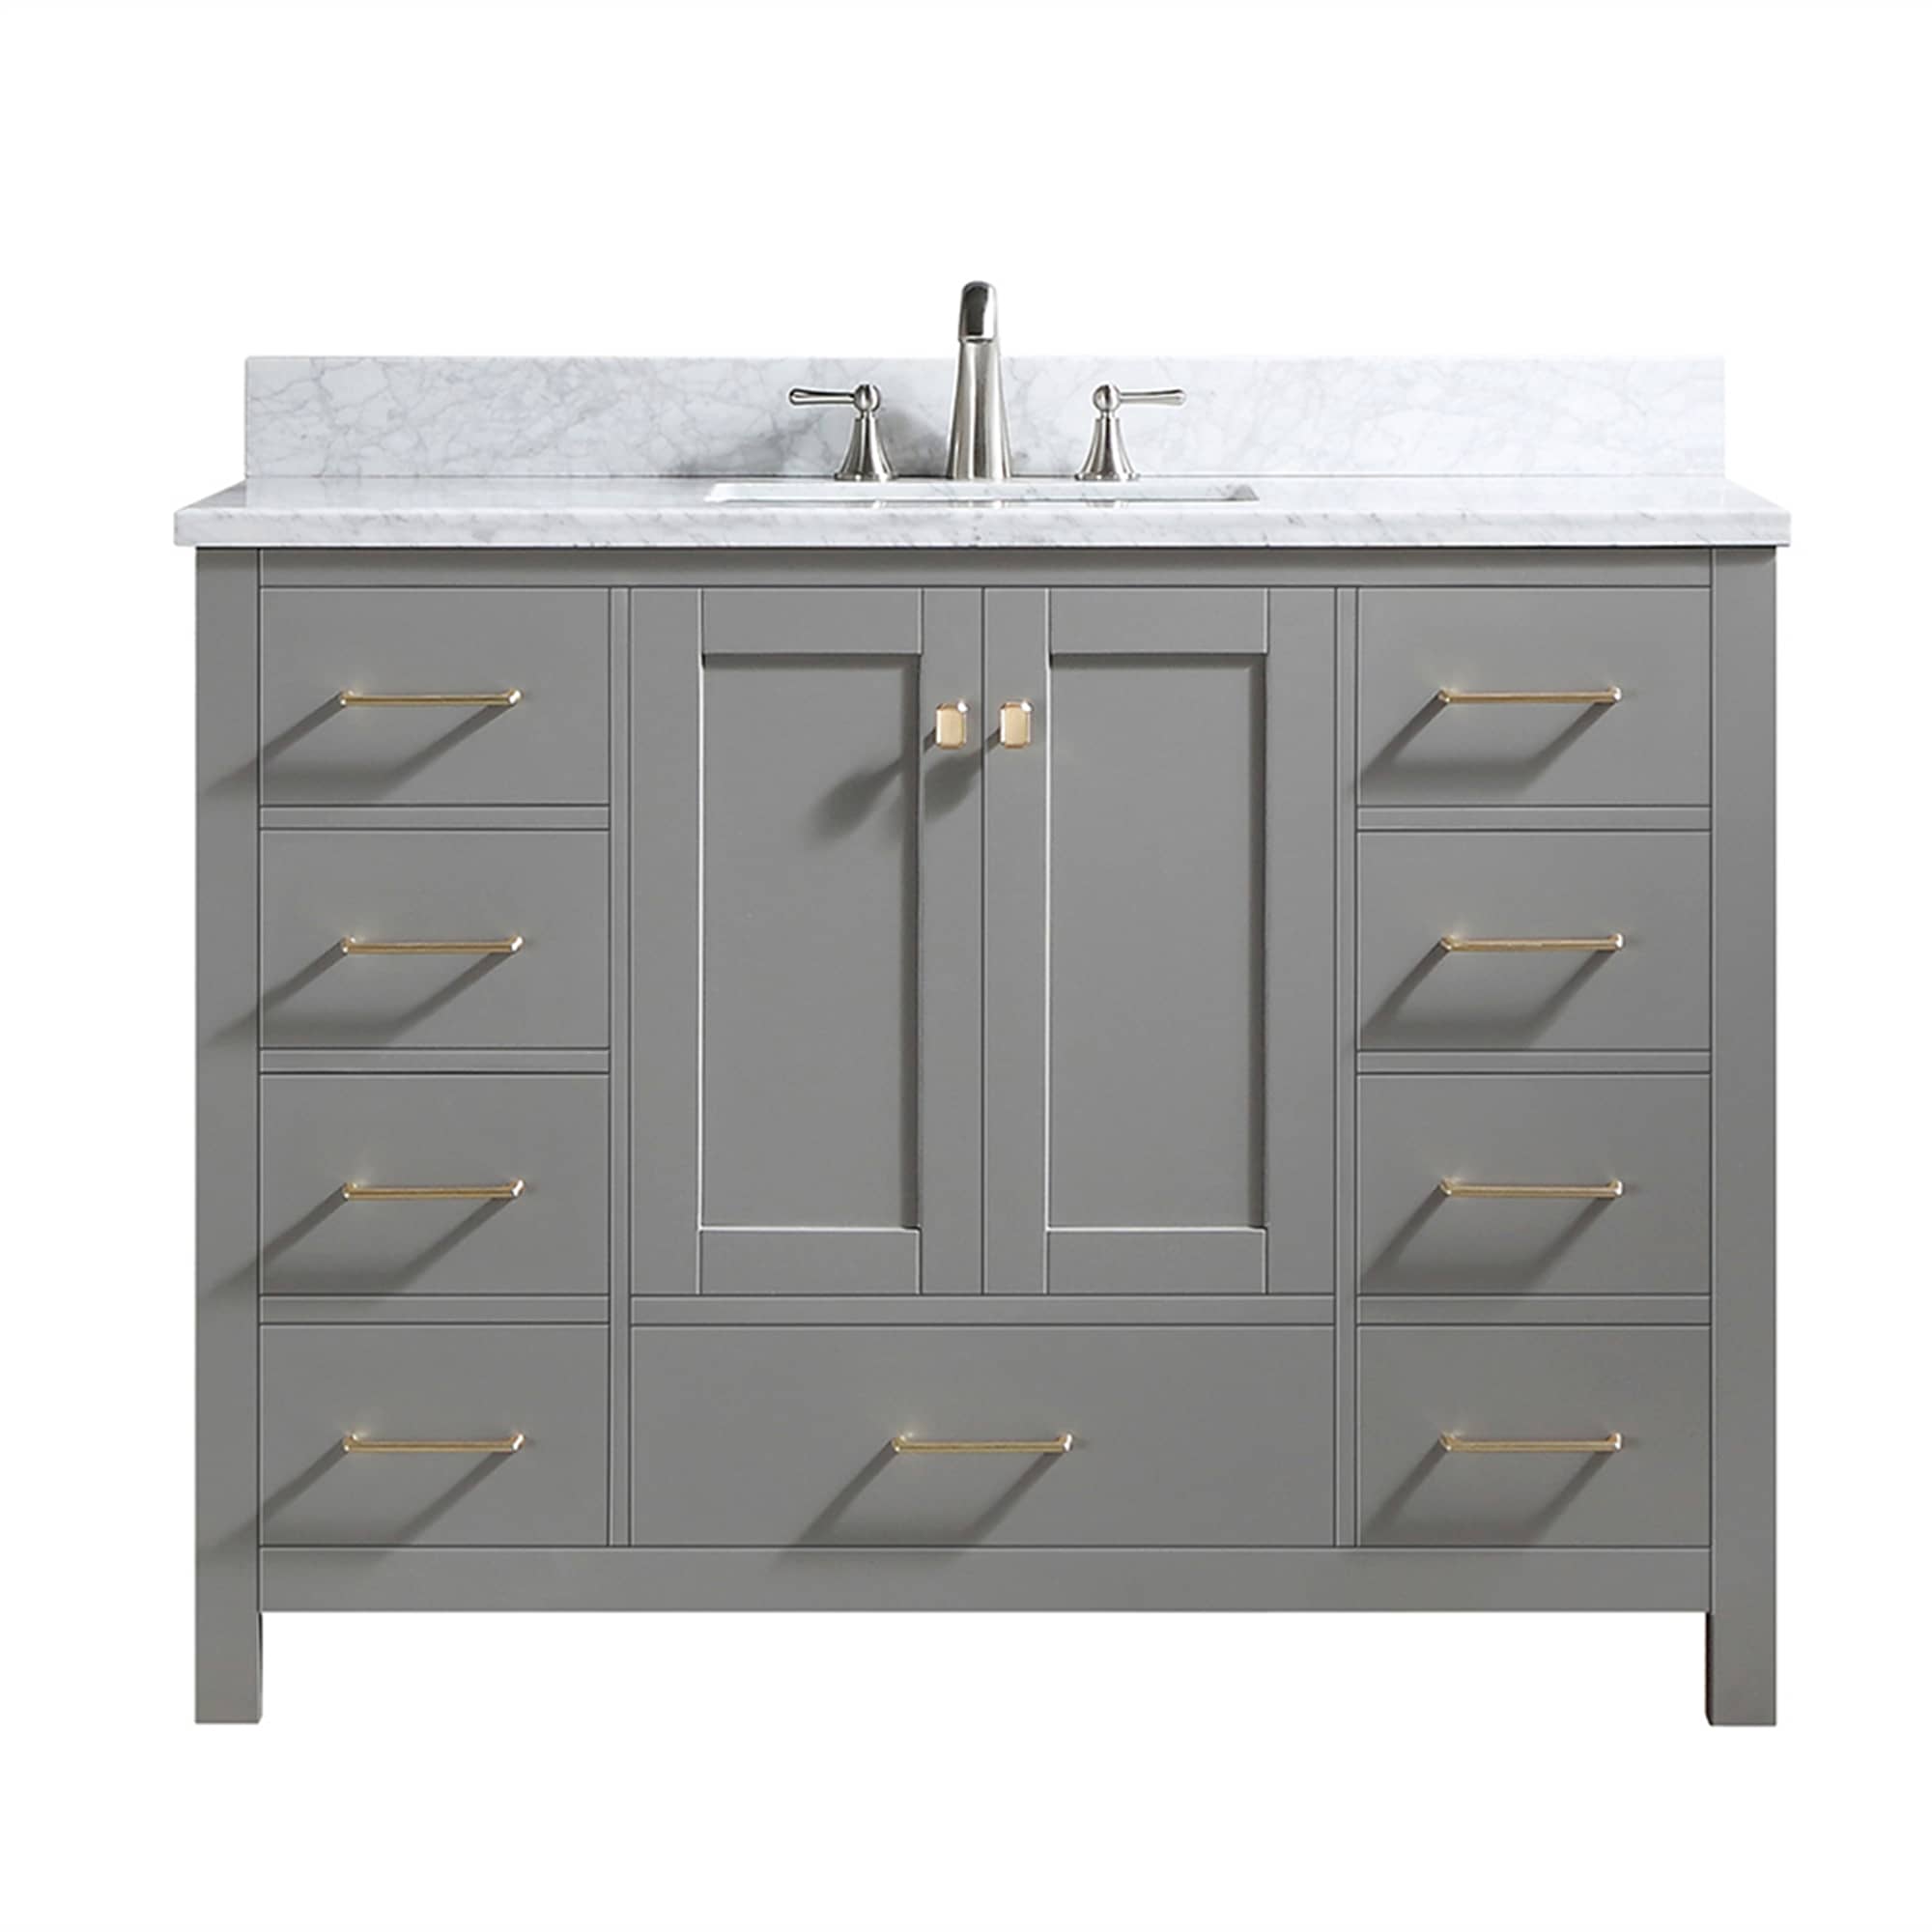 CASAINC 48 Inch Bath Vanity in Gray with White Top and Basin ( 48W x 22D x 35.4"H )